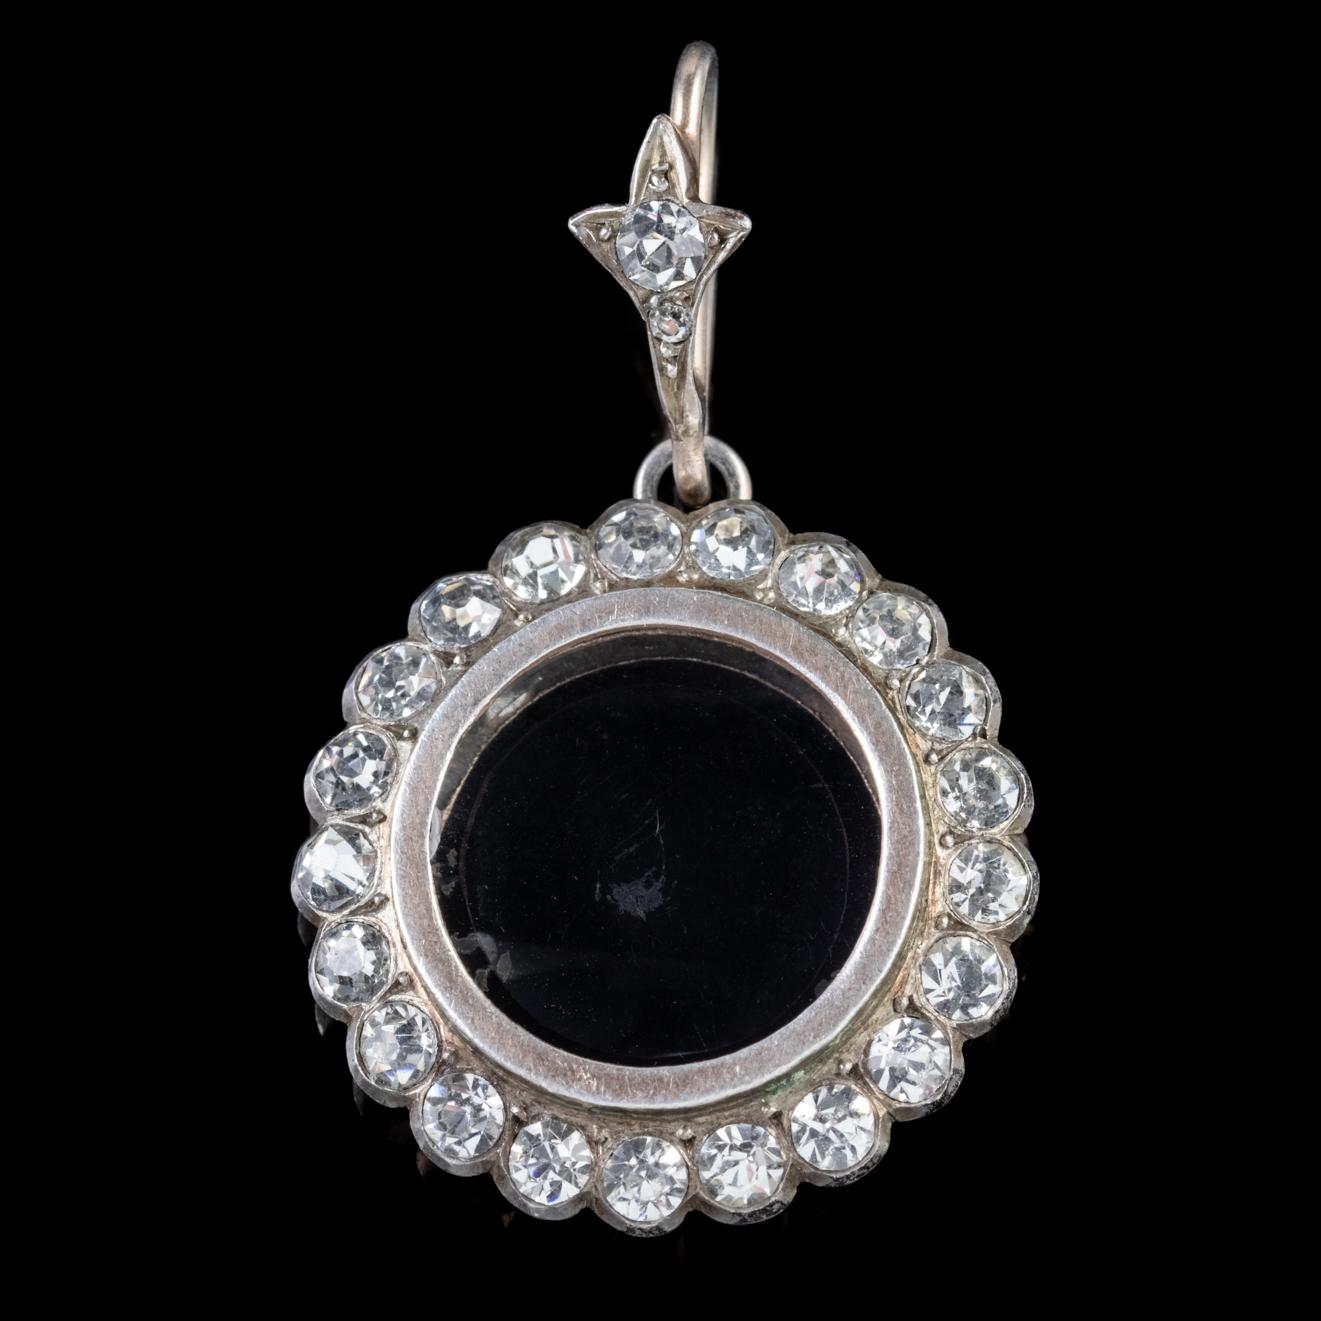 This beautiful antique Edwardian locket is modelled in Silver and features a central window haloed by lovely sparkling Paste Stones. 

Paste is a transparent flint glass that simulates the fire and brilliance of gemstones. White Pastes sparkle just